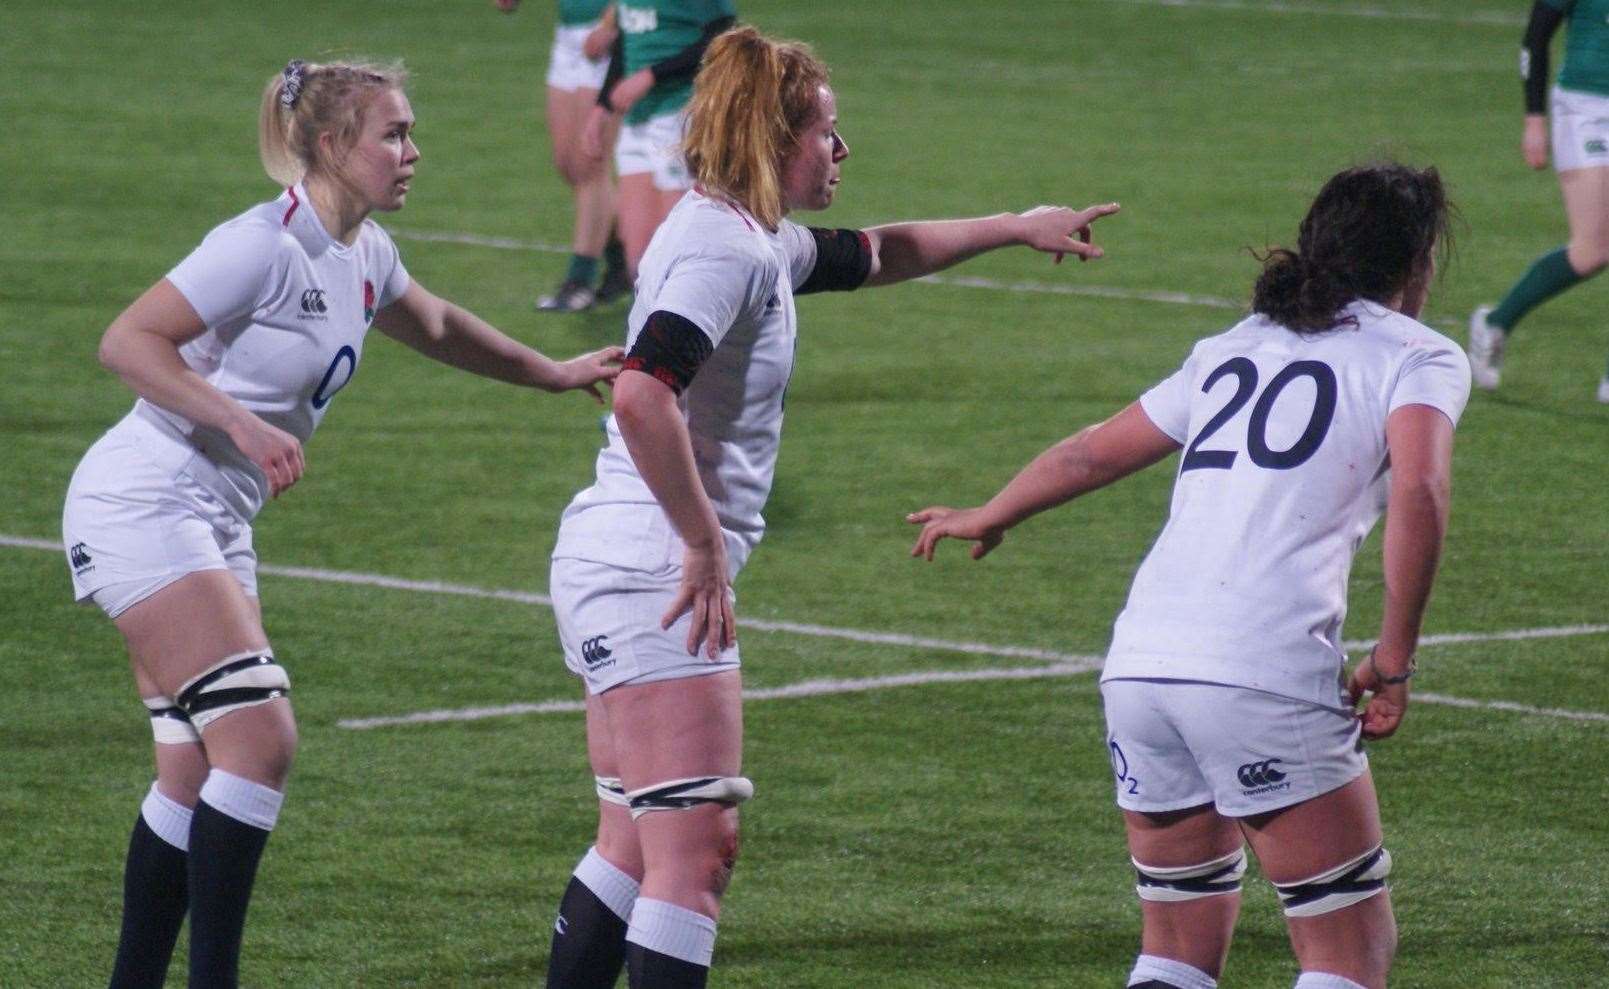 West Malling's Rosie Galligan scored a hat-trick in a Women's Rugby World Cup win for England over South Africa